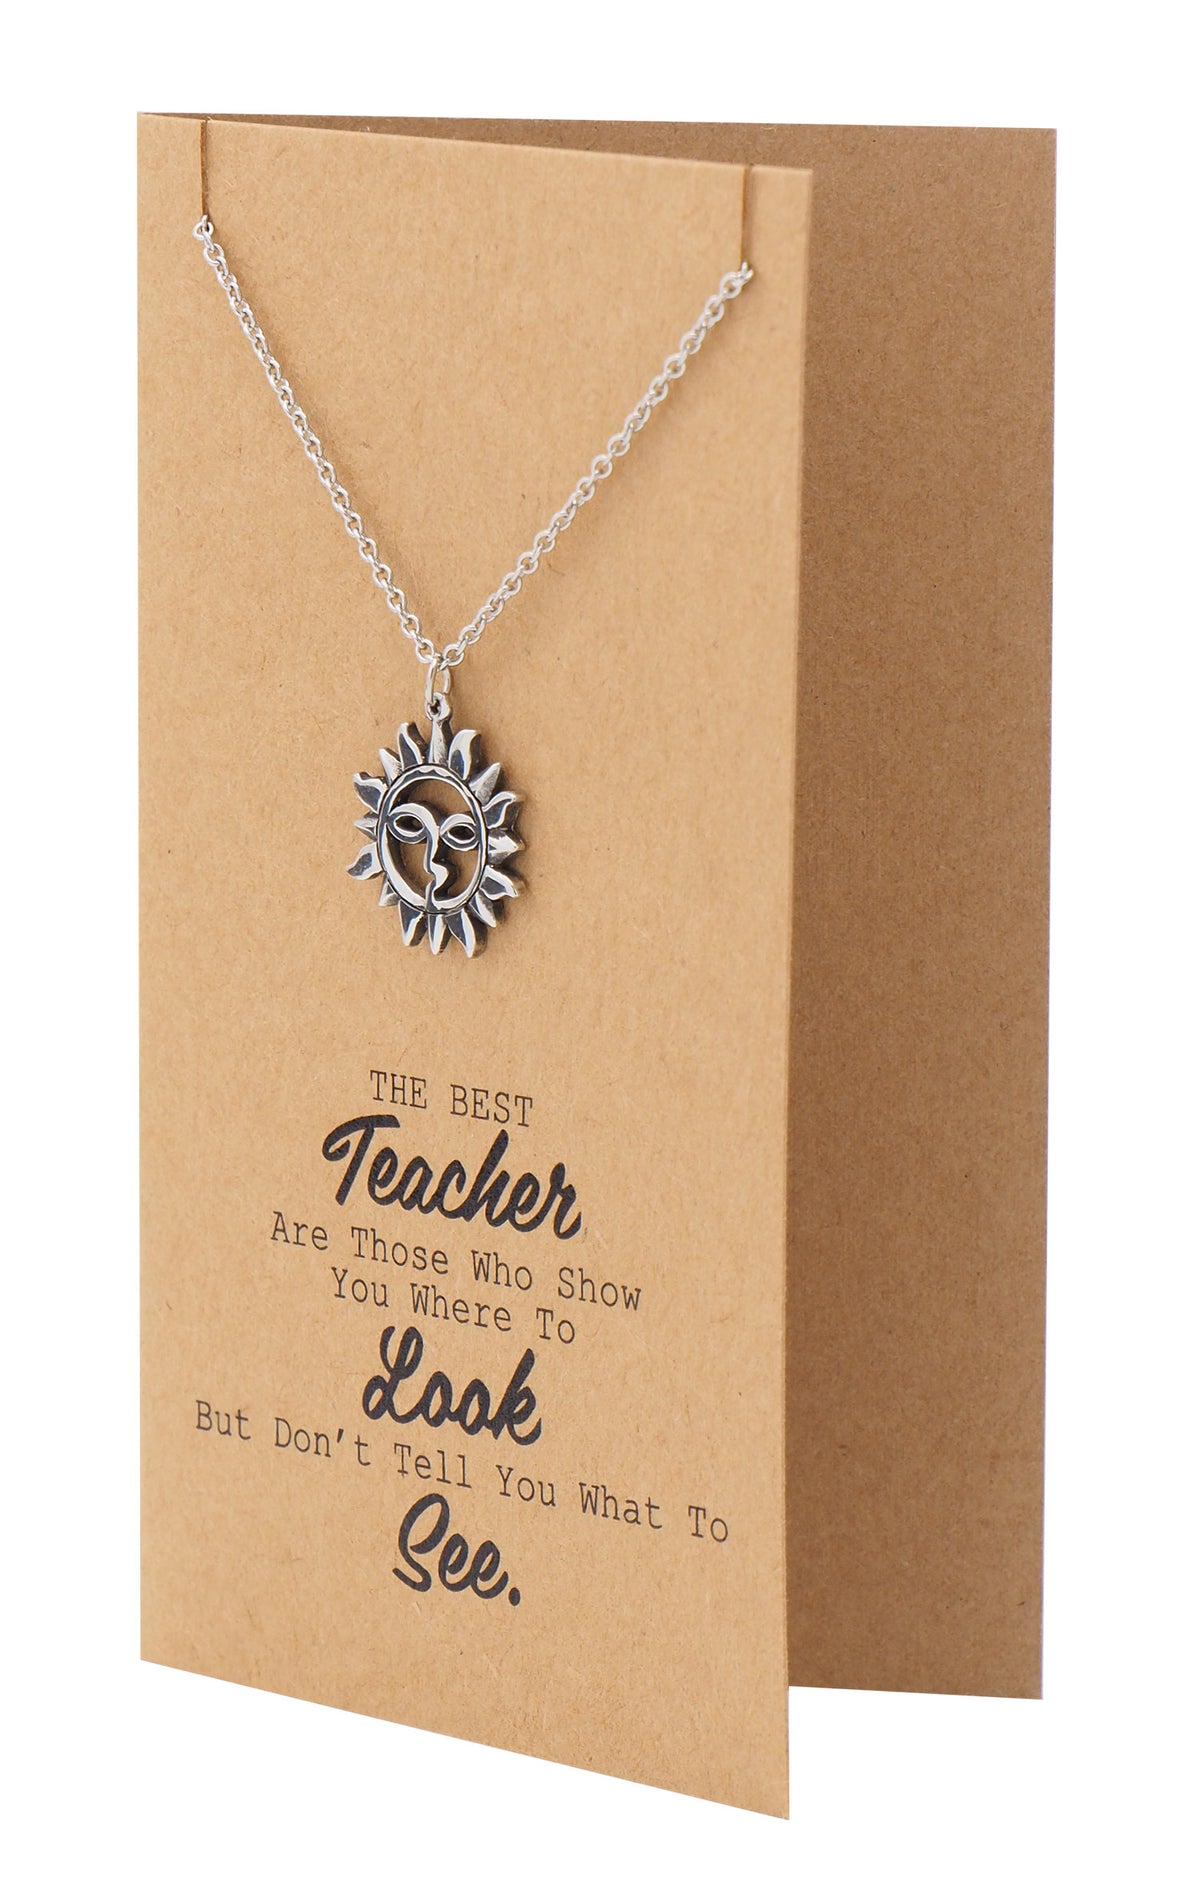 Brandi Teacher Quotes Gifts Sun Necklace and Thank You Cards - Quan Jewelry